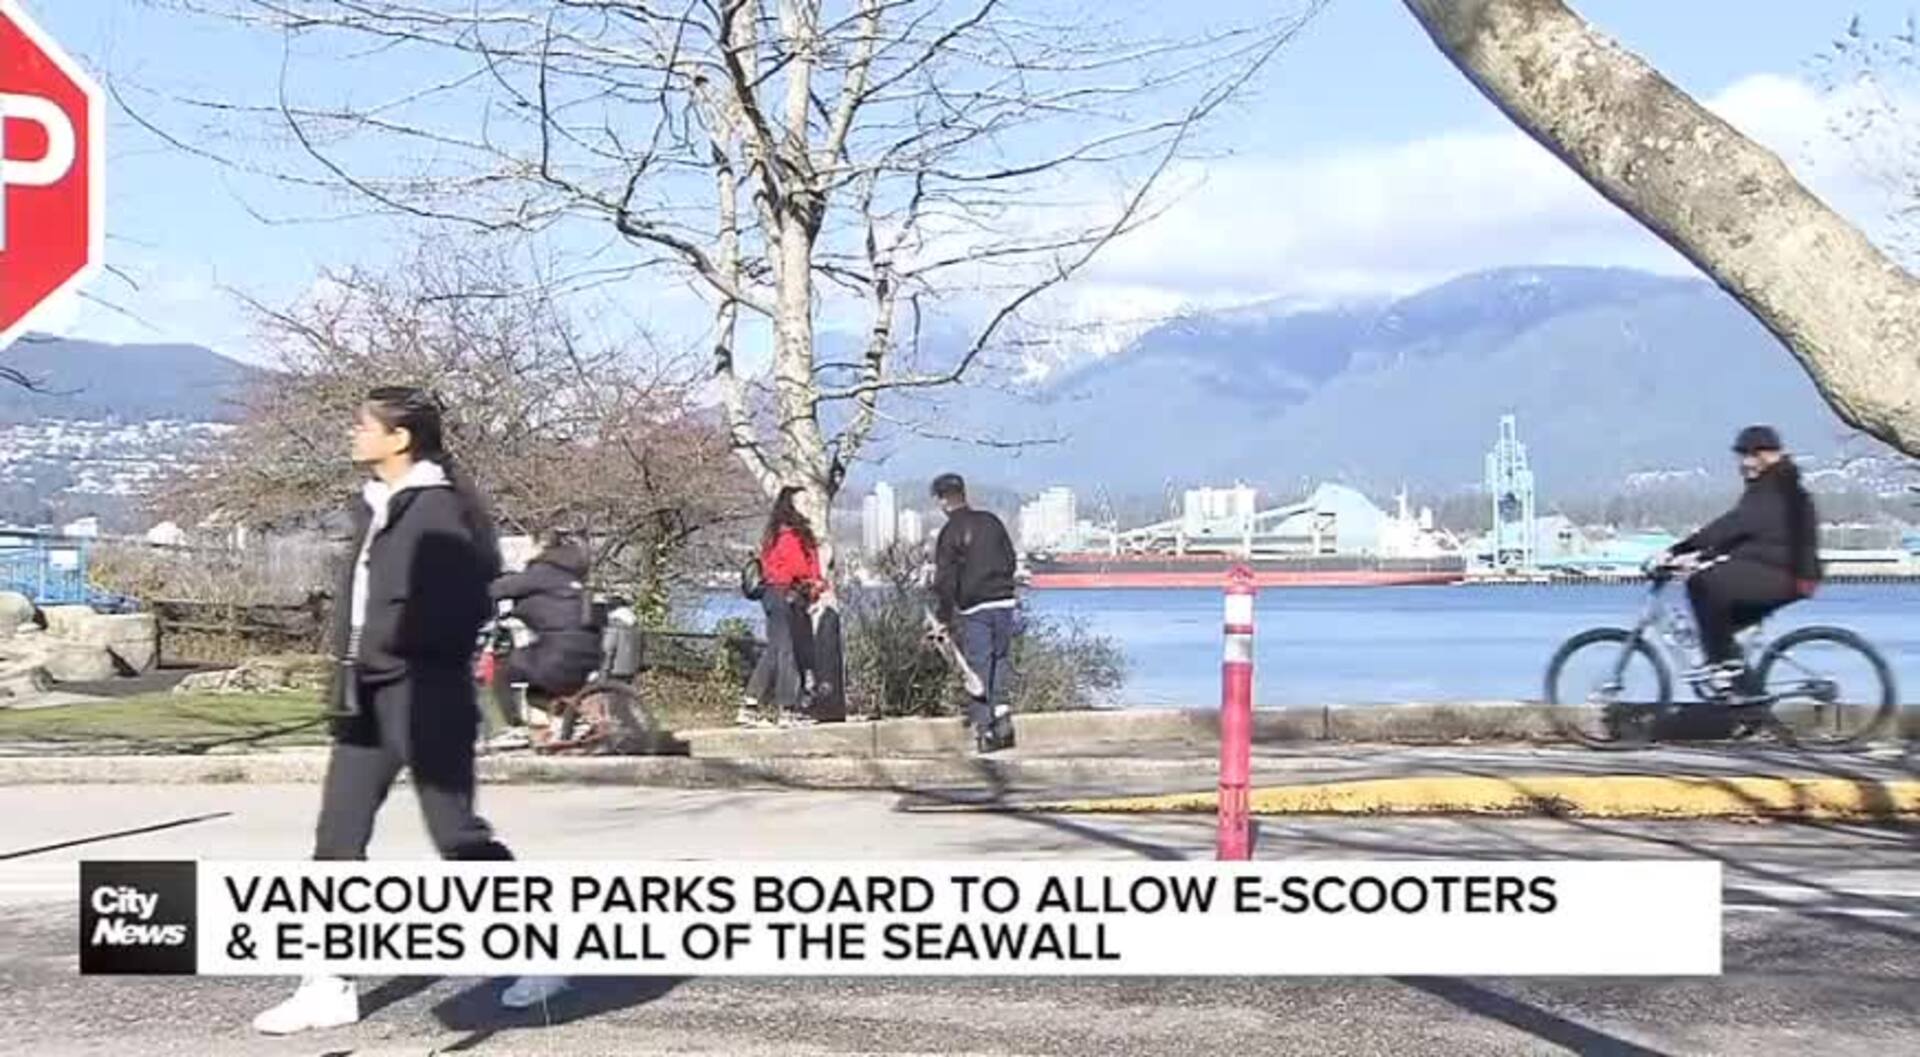 Vancouver Park Board to allow e-scooters and e-bikes on Seawall